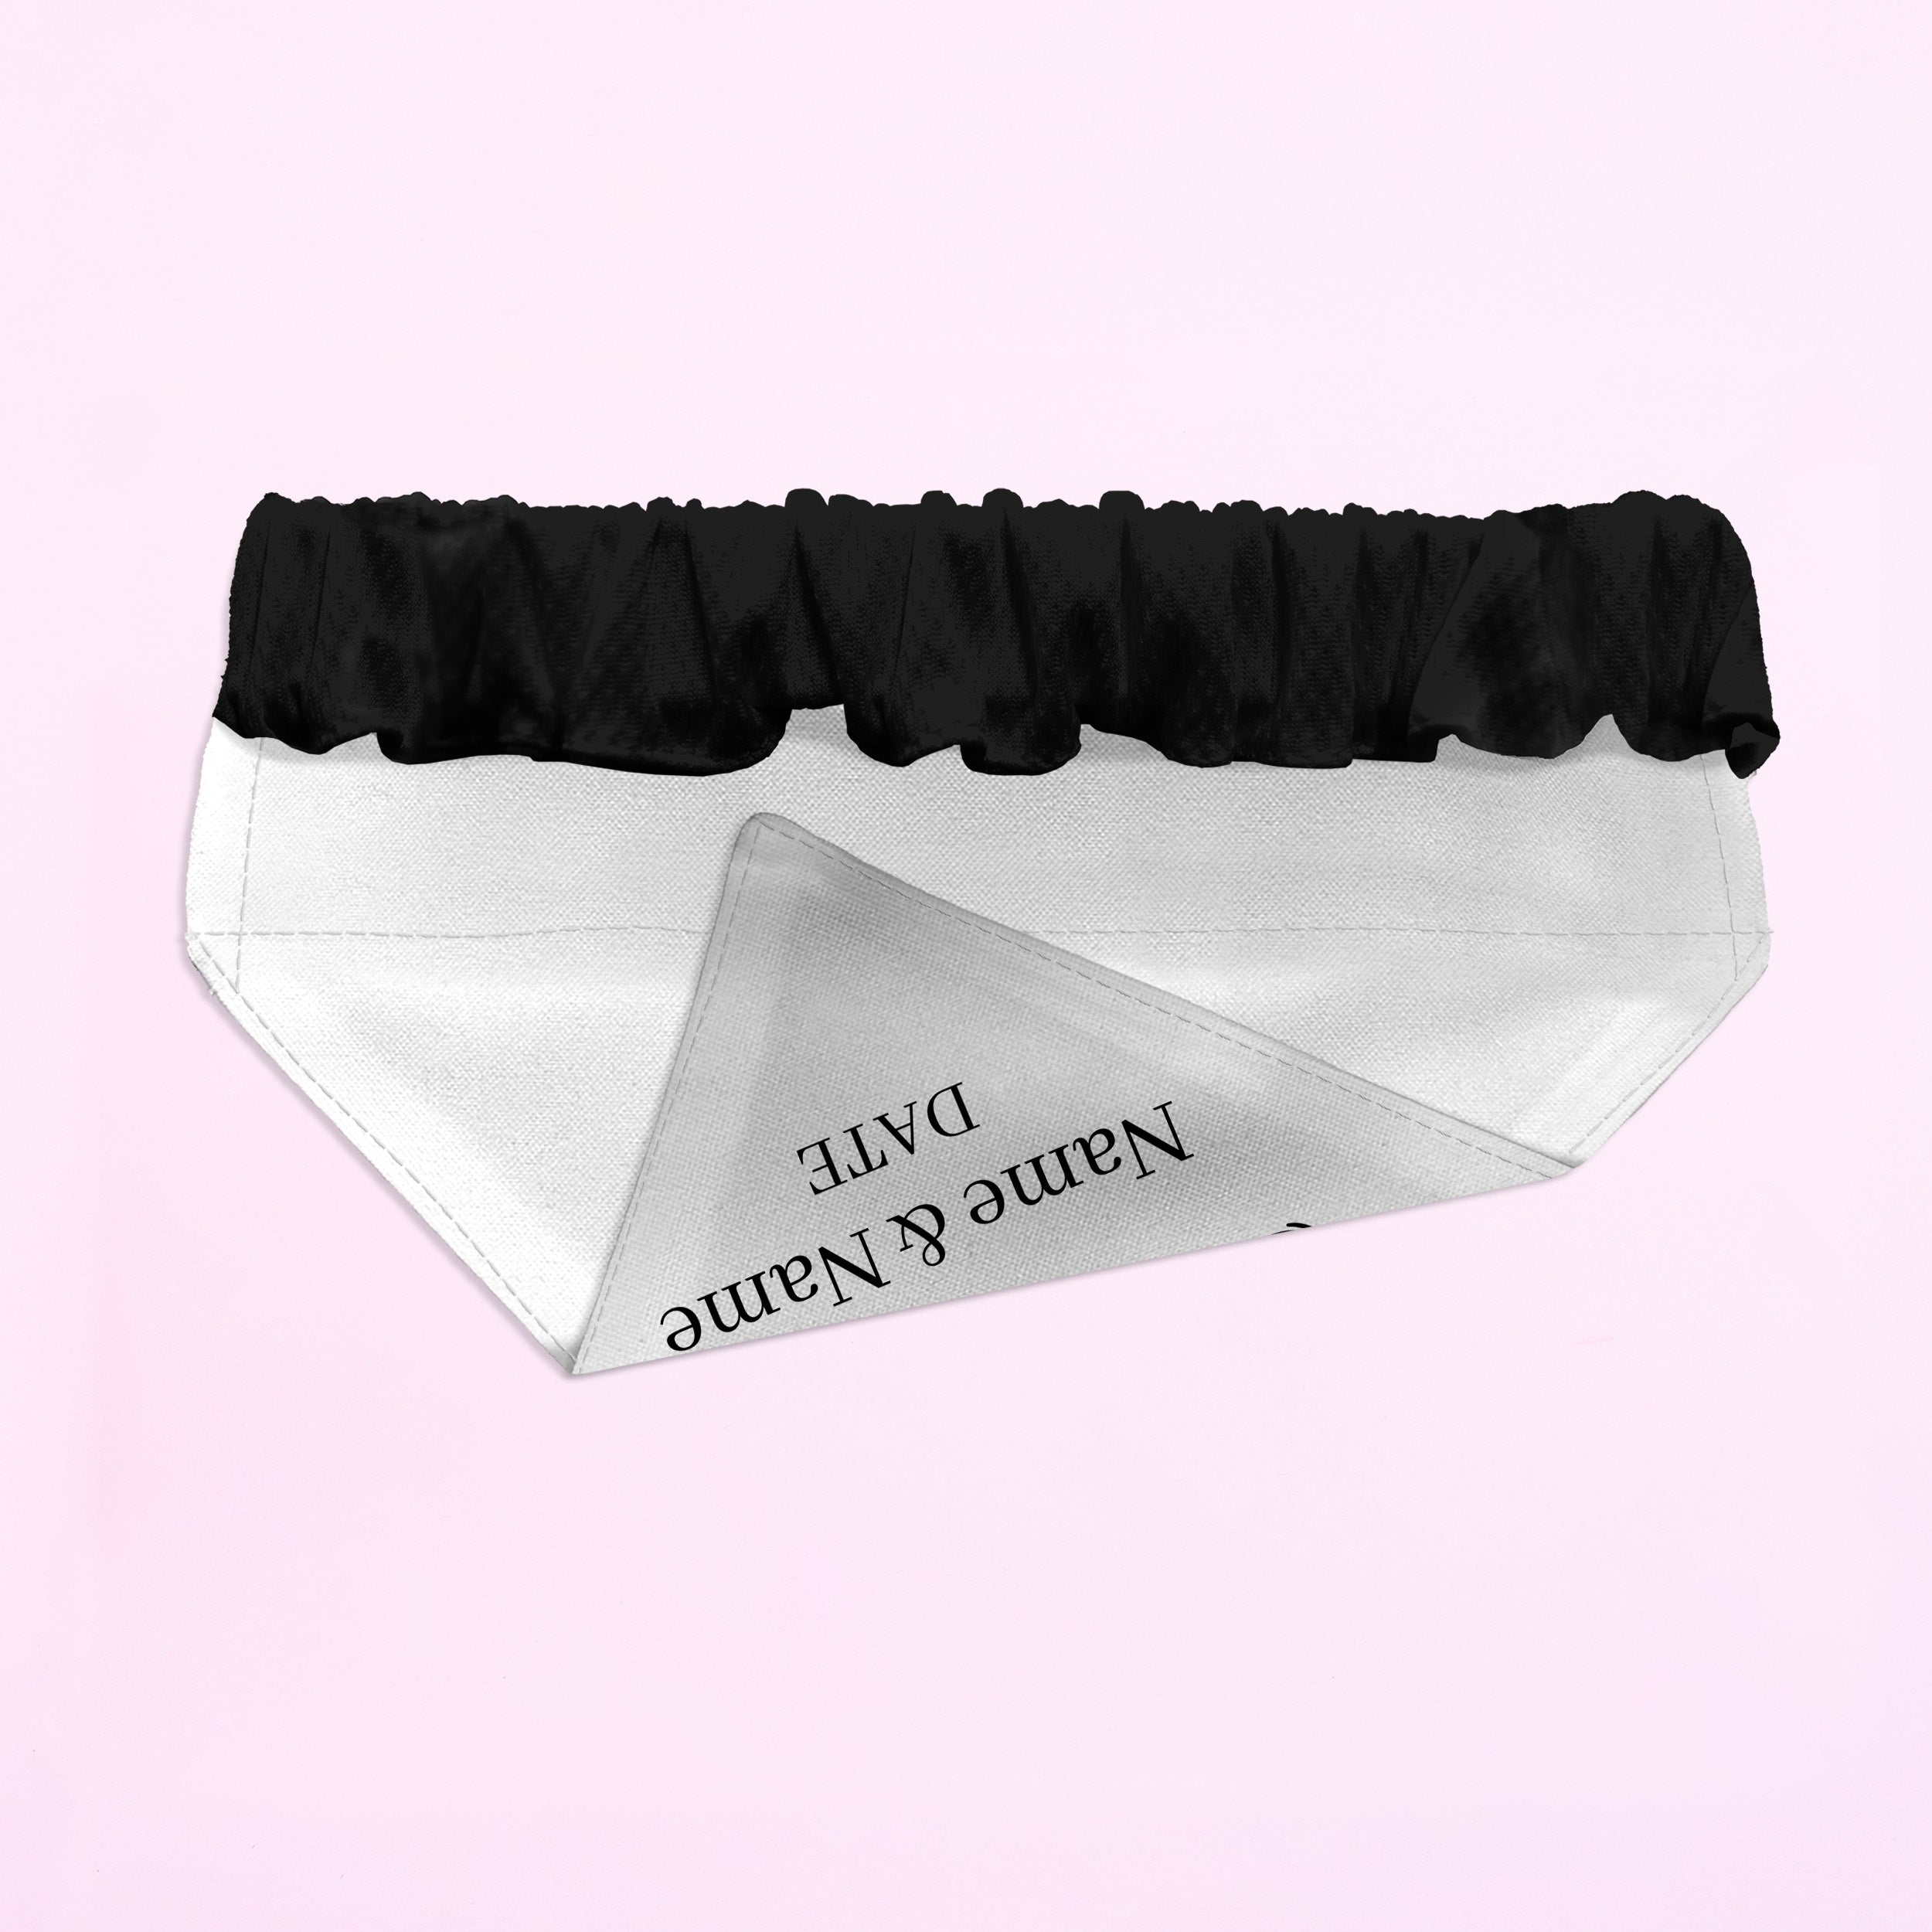 My Humans Are Getting Married - Custom Personalised Dog Bandana - 4 Sizes